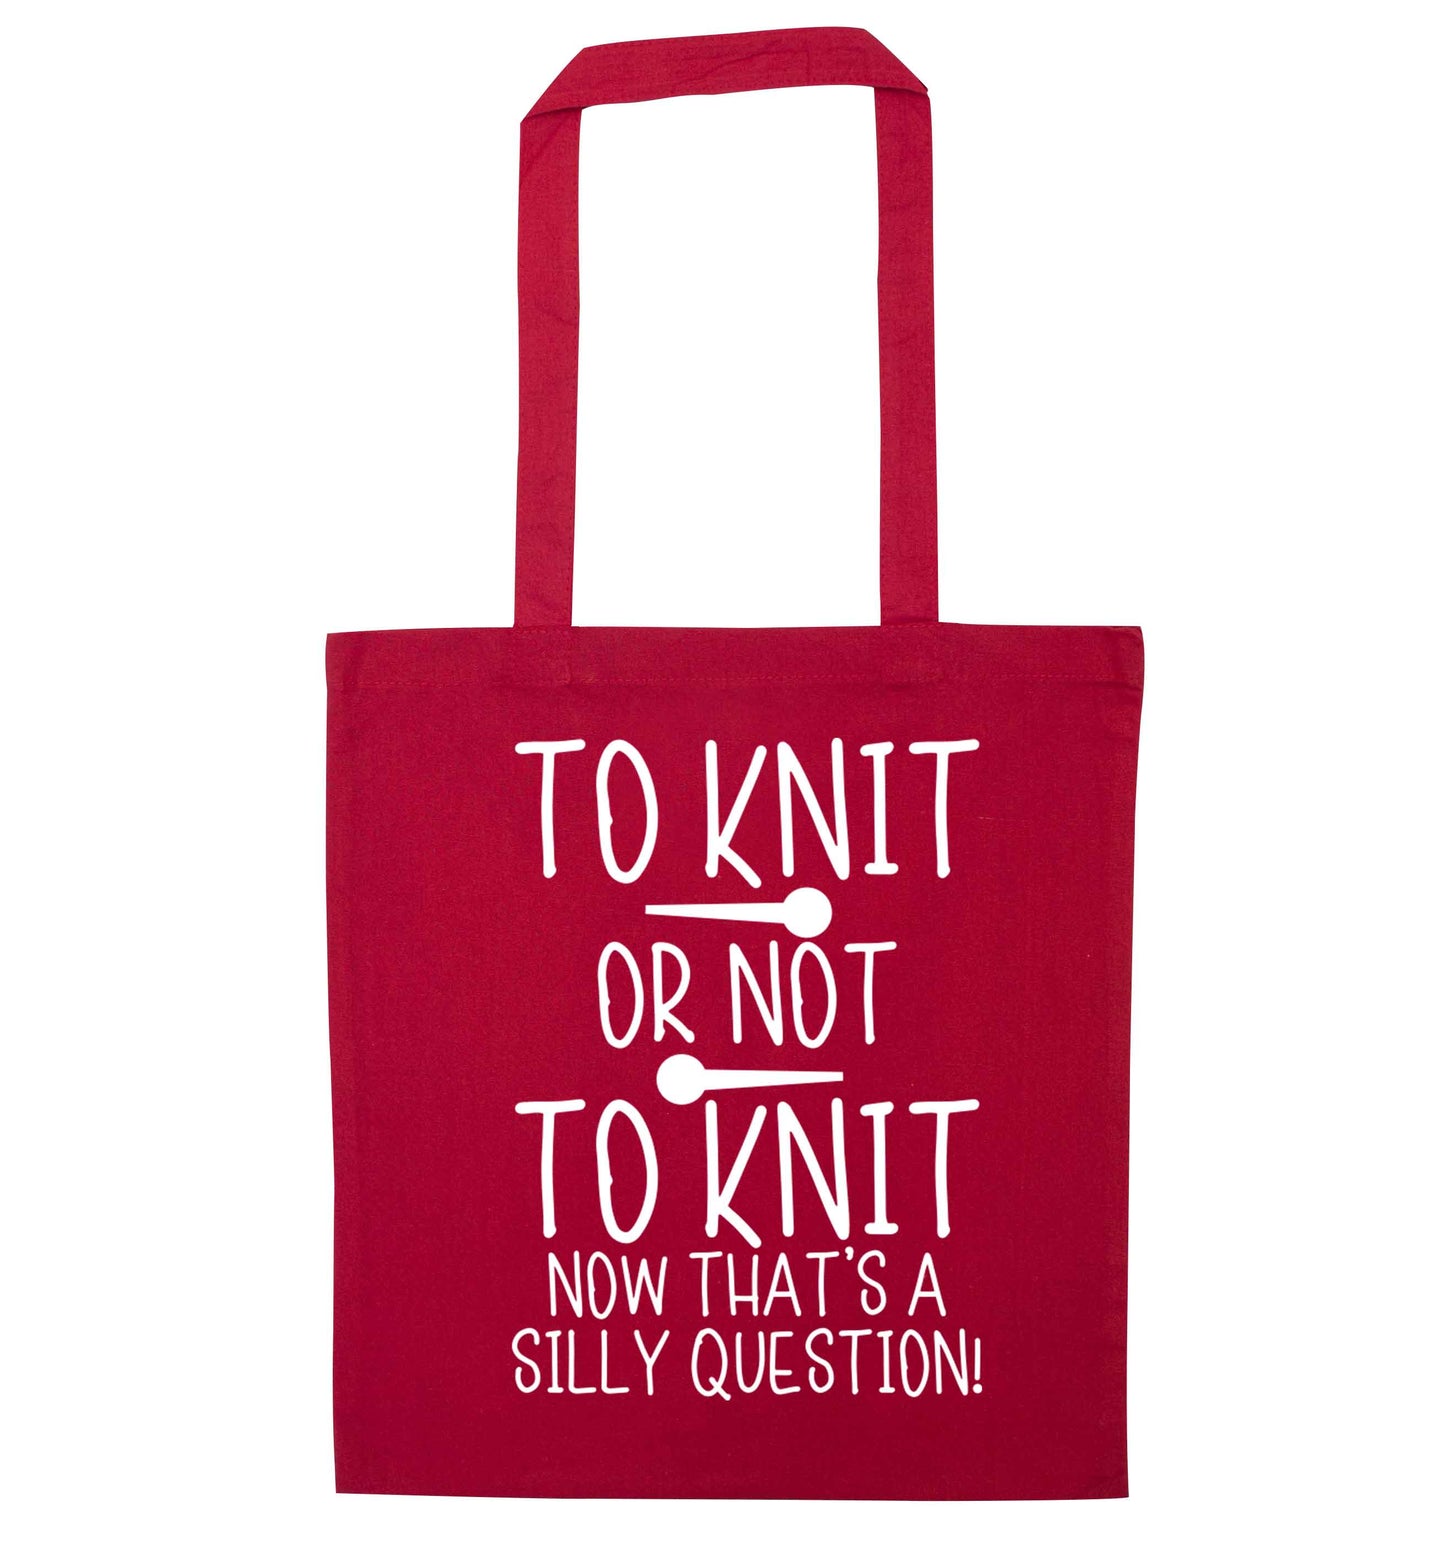 To knit or not to knit now that's a silly question red tote bag